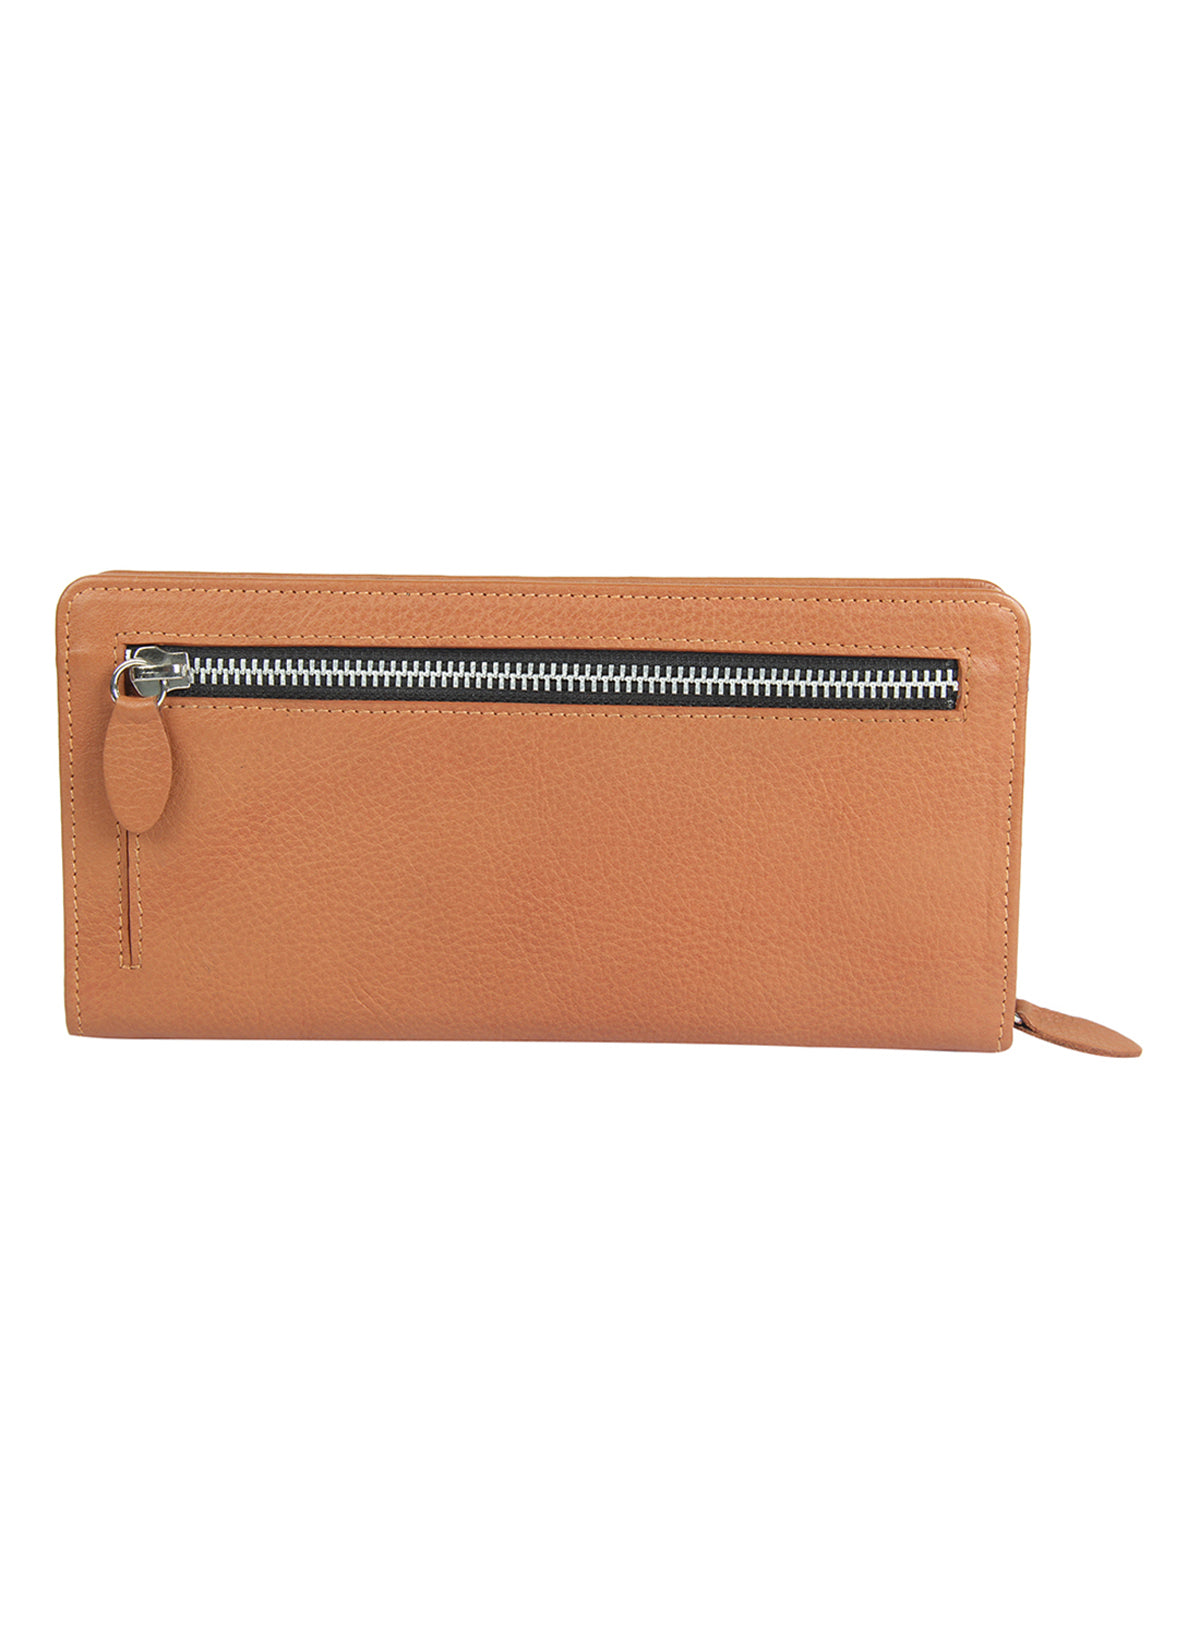 Genuine leather tan gusset clutch